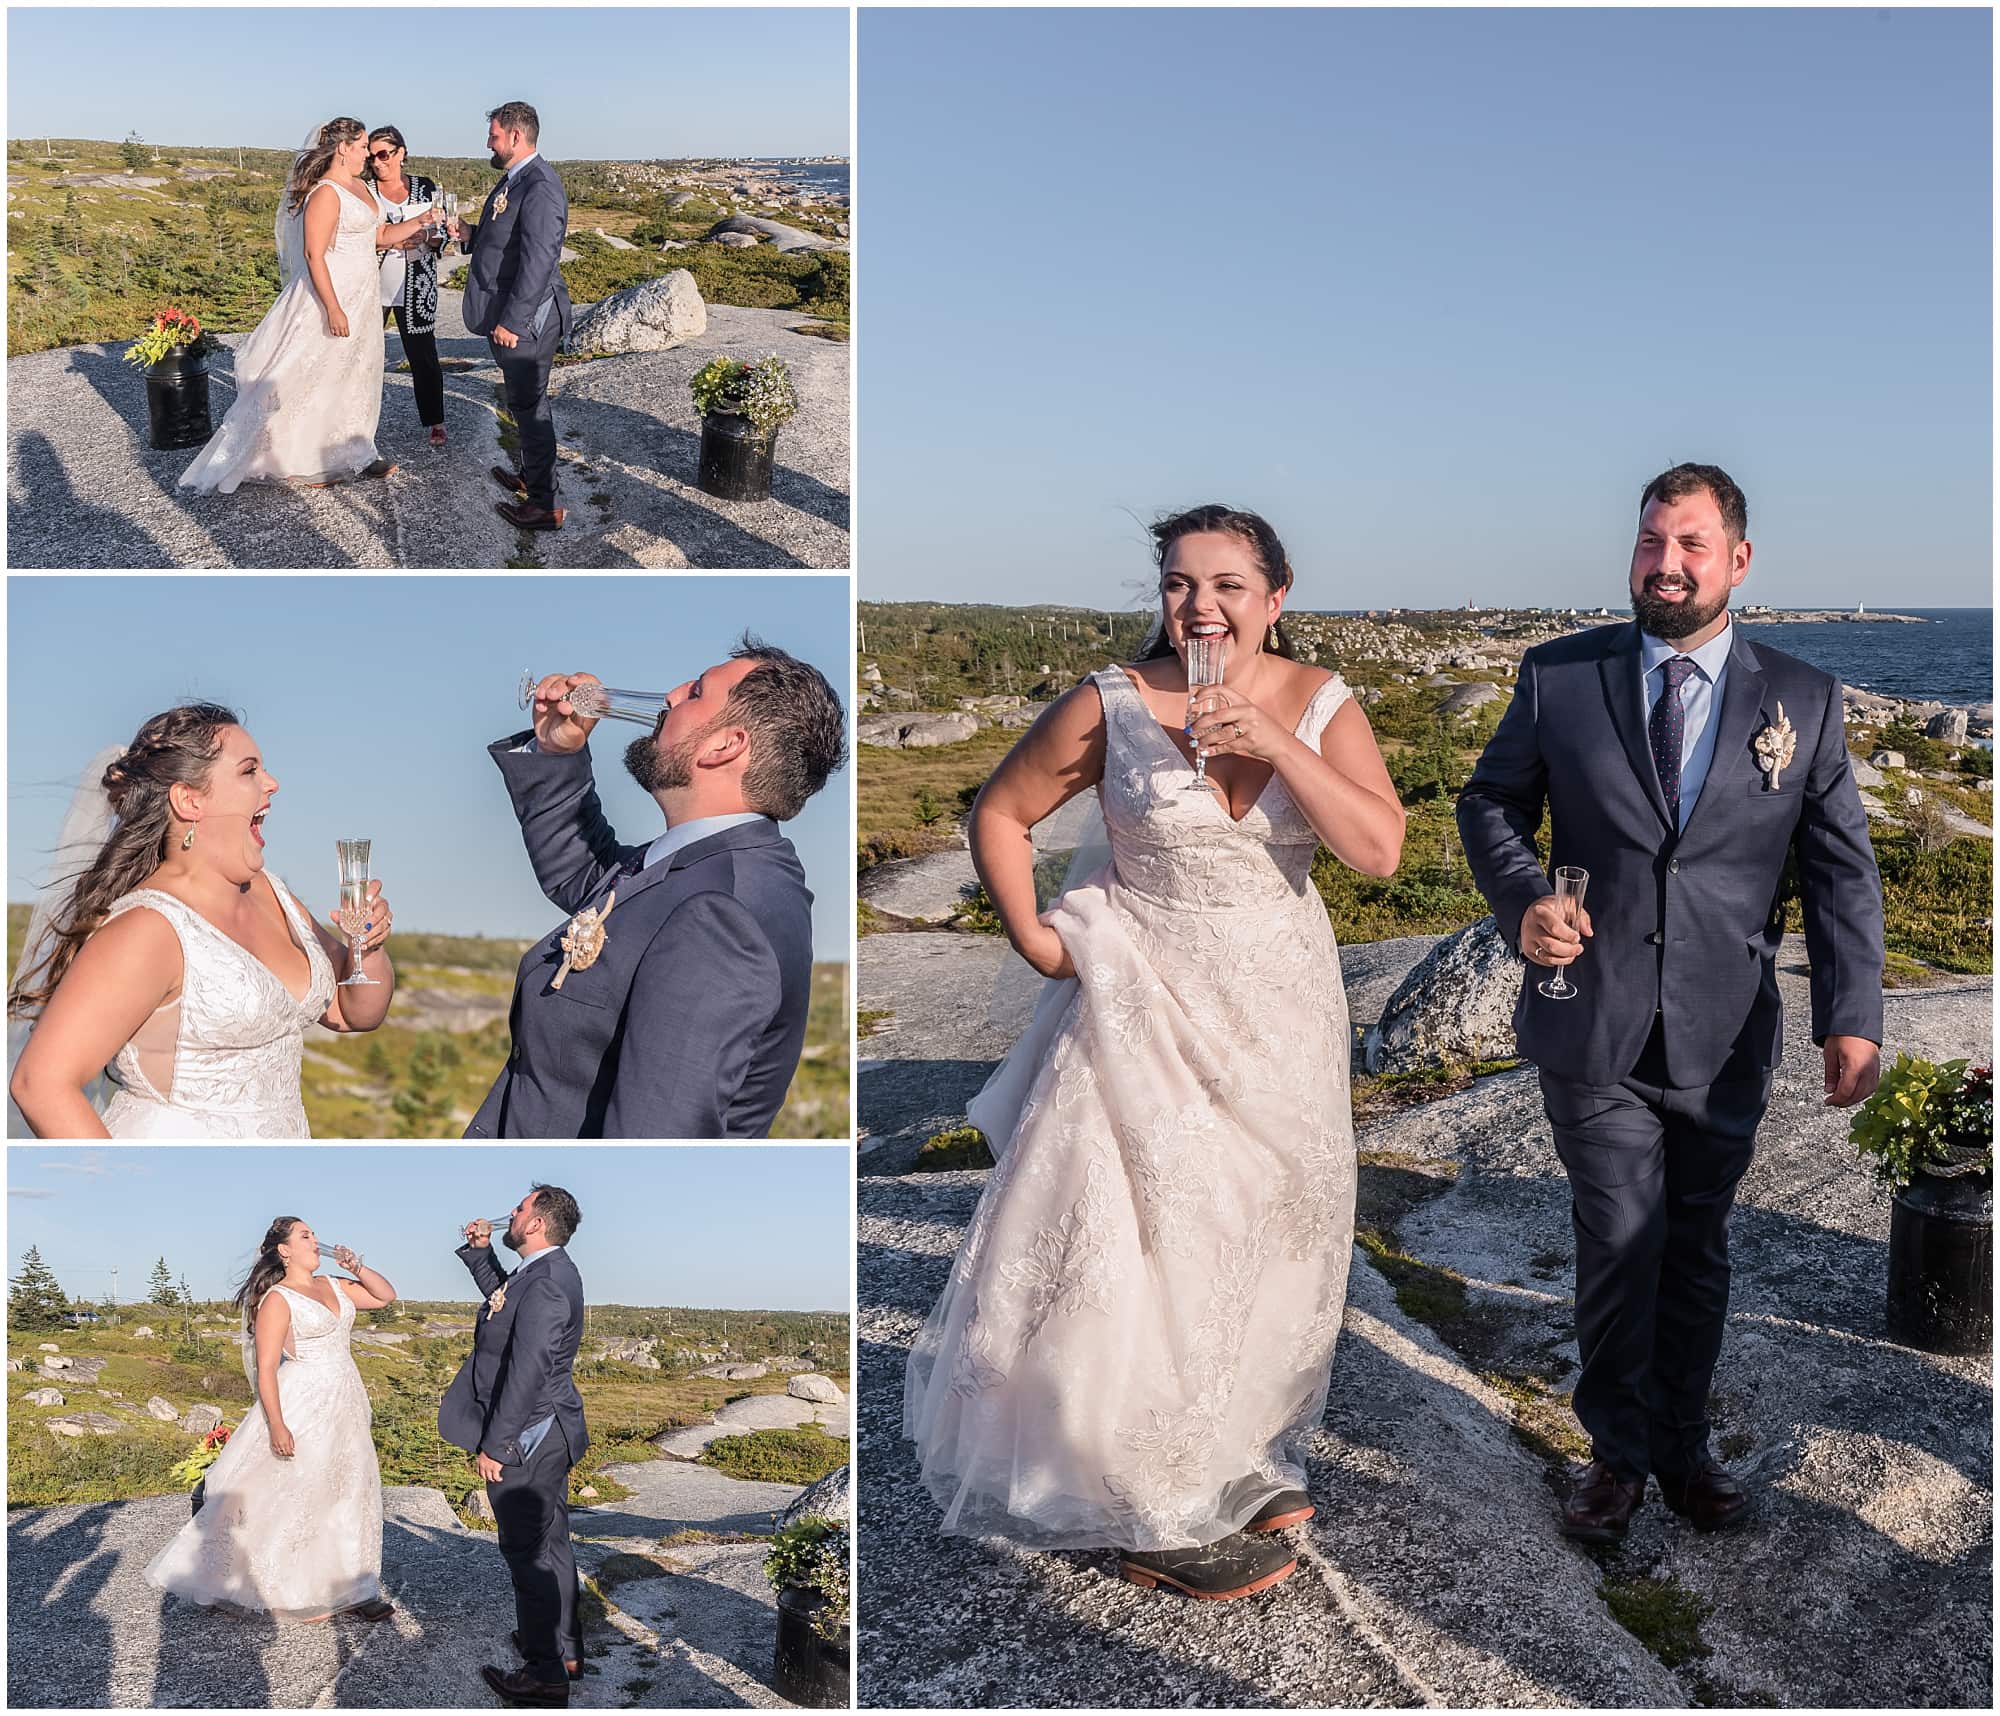 The bride and groom drink wine as a show of unity during their wedding ceremony at Peggy's Cove in Nova Scotia.